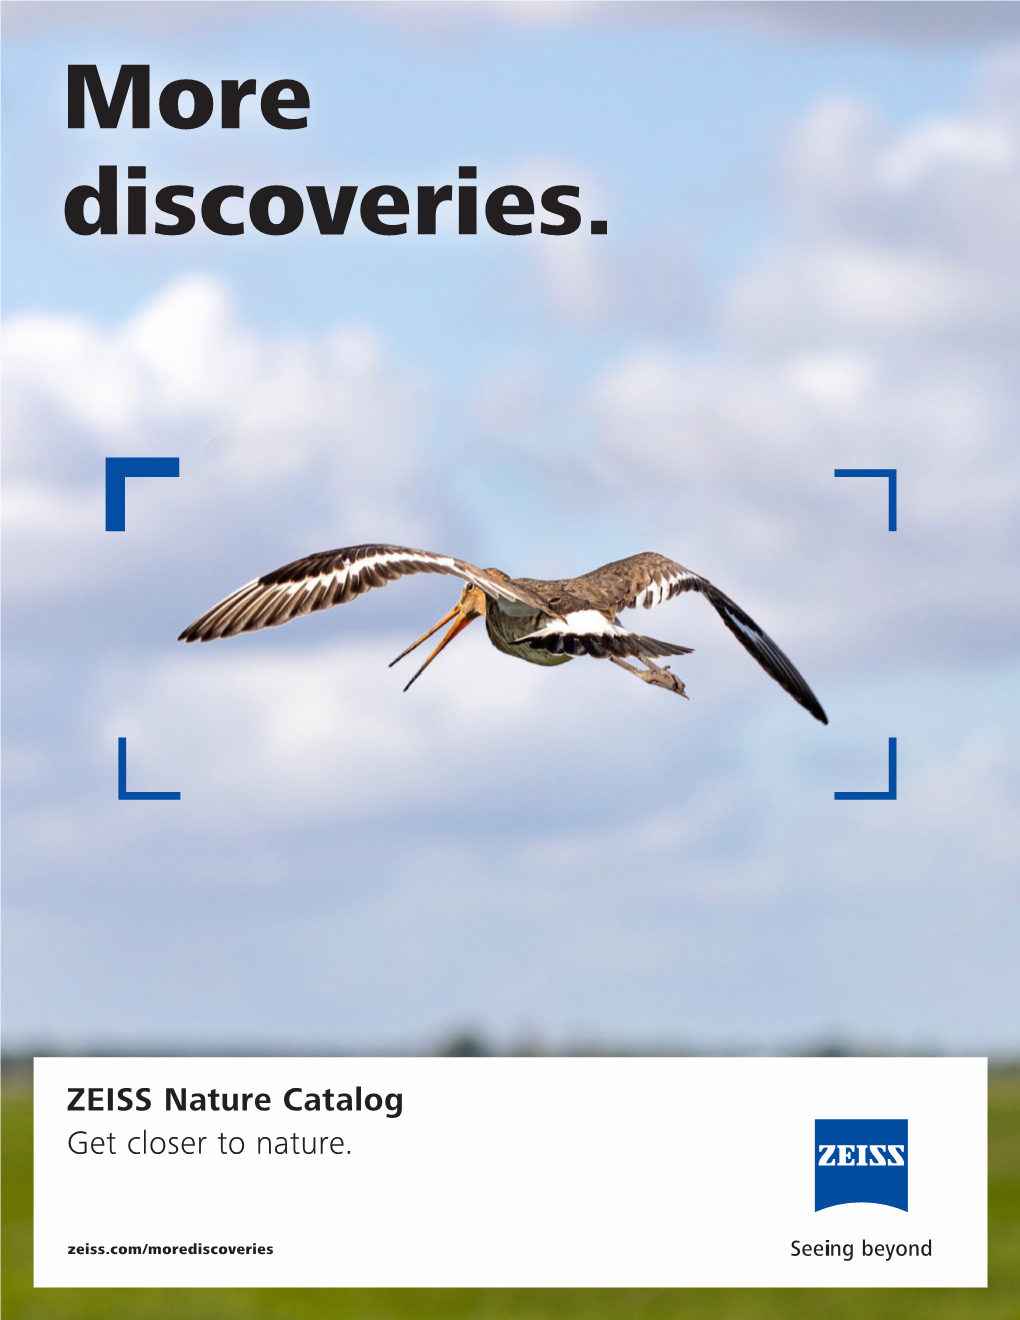 ZEISS Nature Catalog Get Closer to Nature